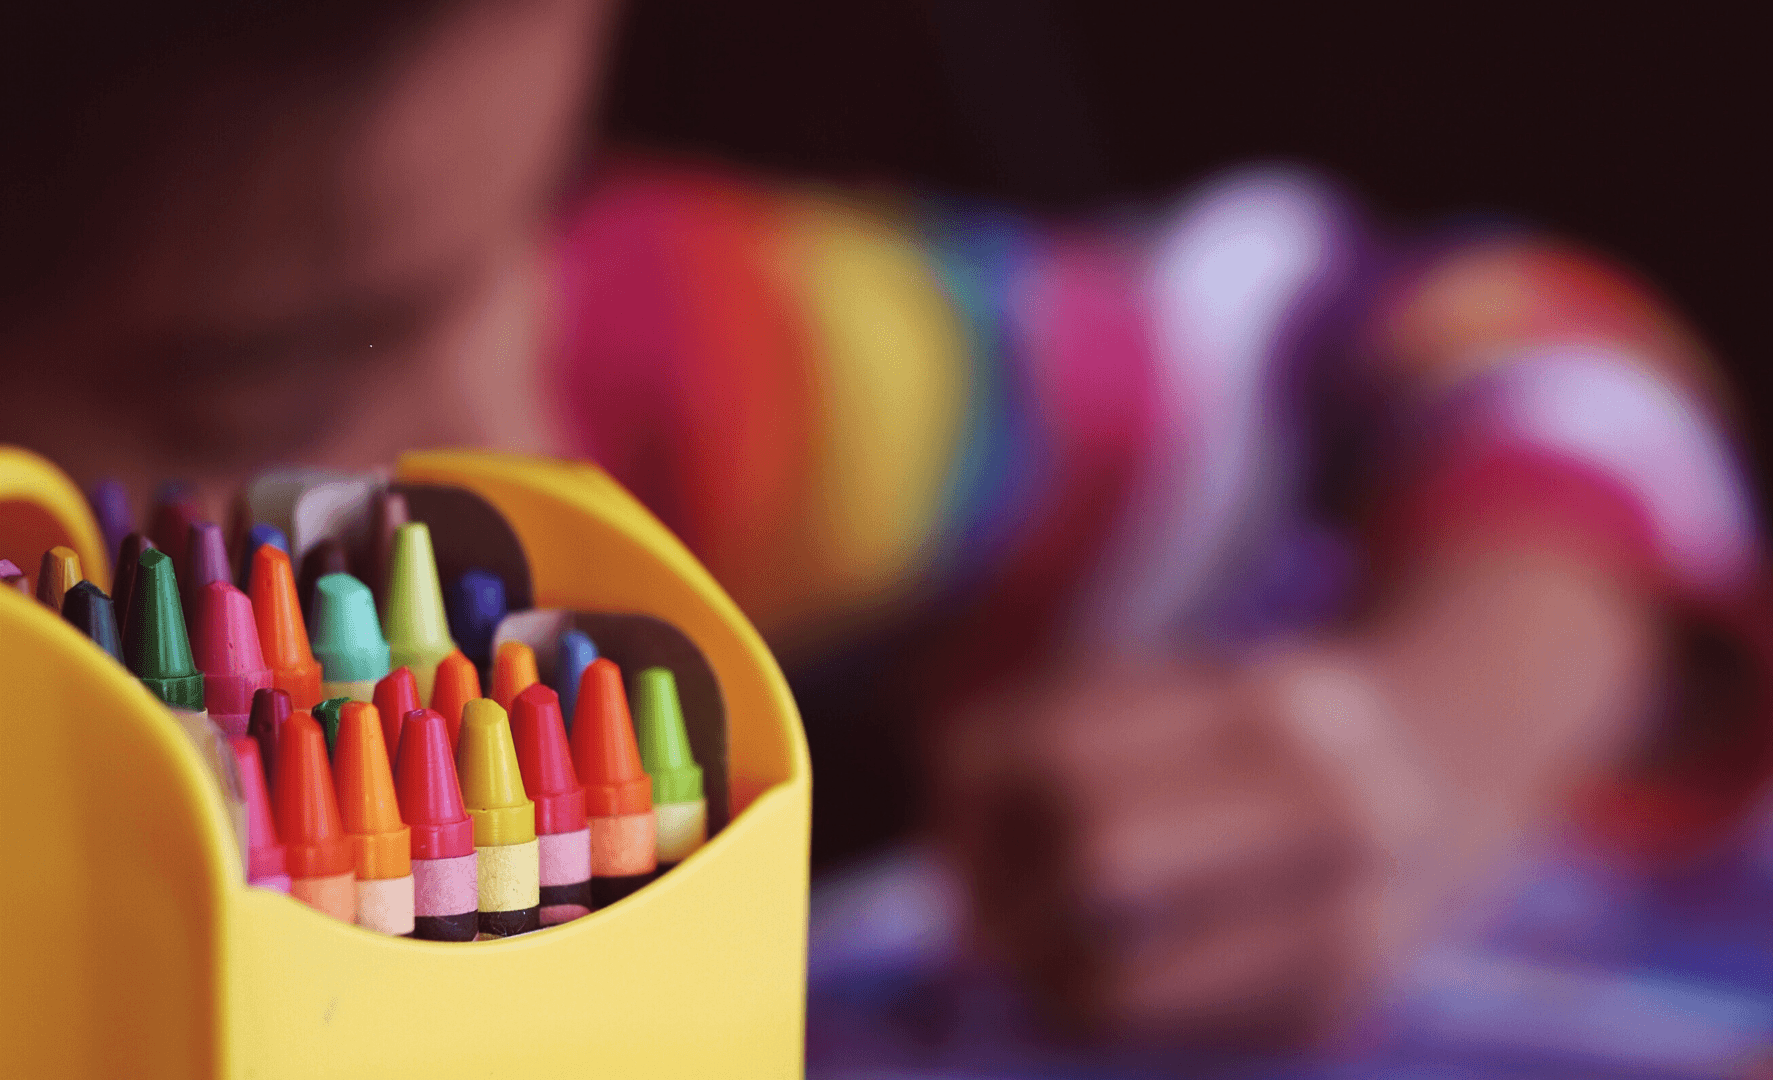 Picture of a box of crayons with a kid blurred in the background.